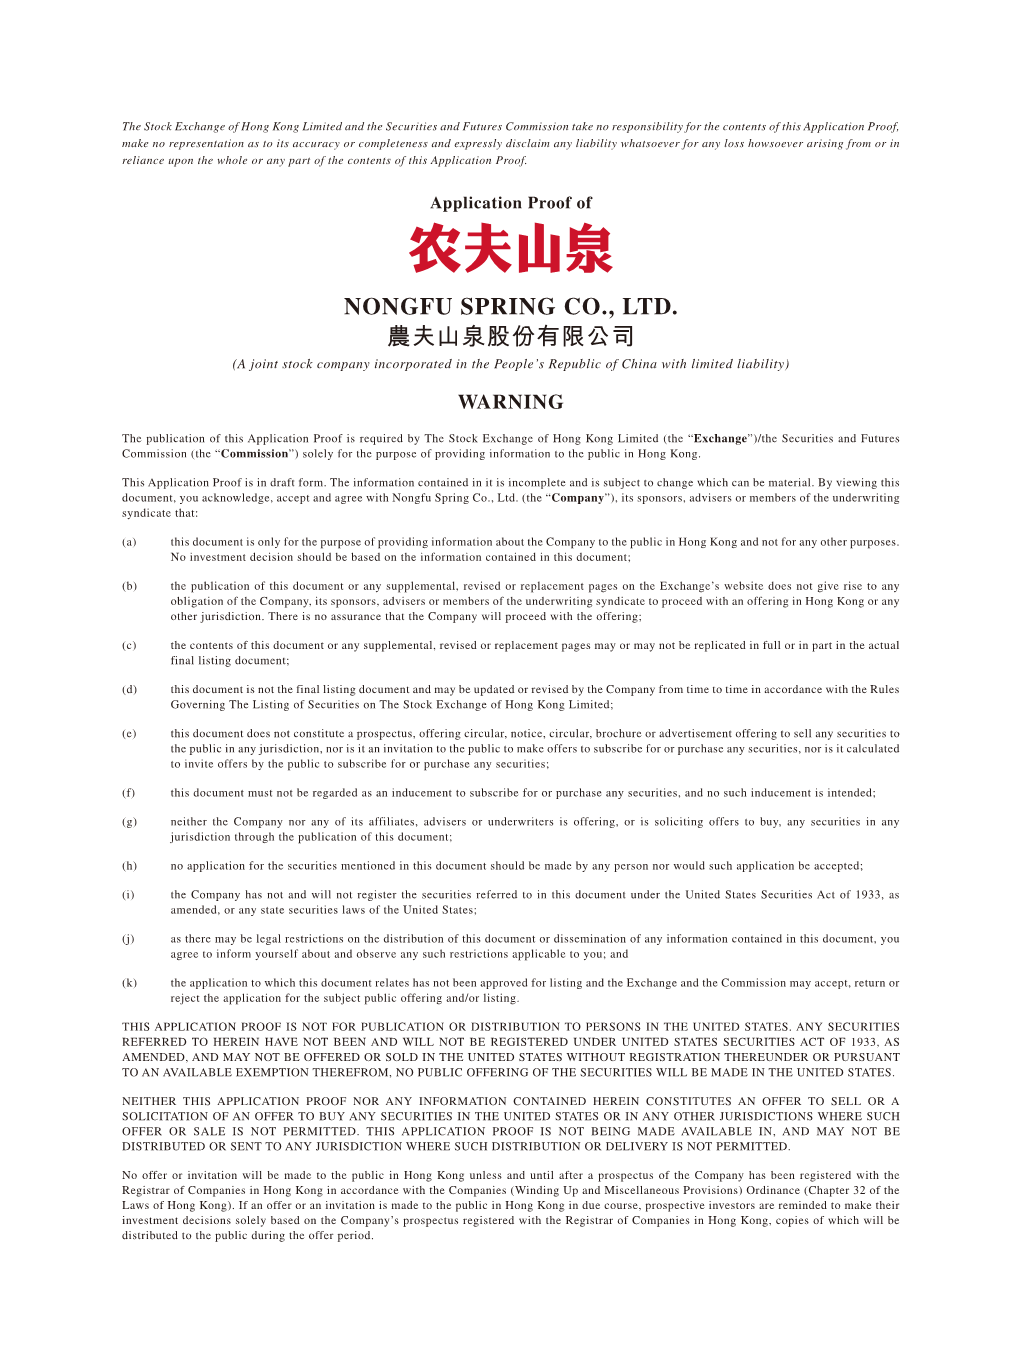 NONGFU SPRING CO., LTD. 農夫山泉股份有限公司 (A Joint Stock Company Incorporated in the People’S Republic of China with Limited Liability)